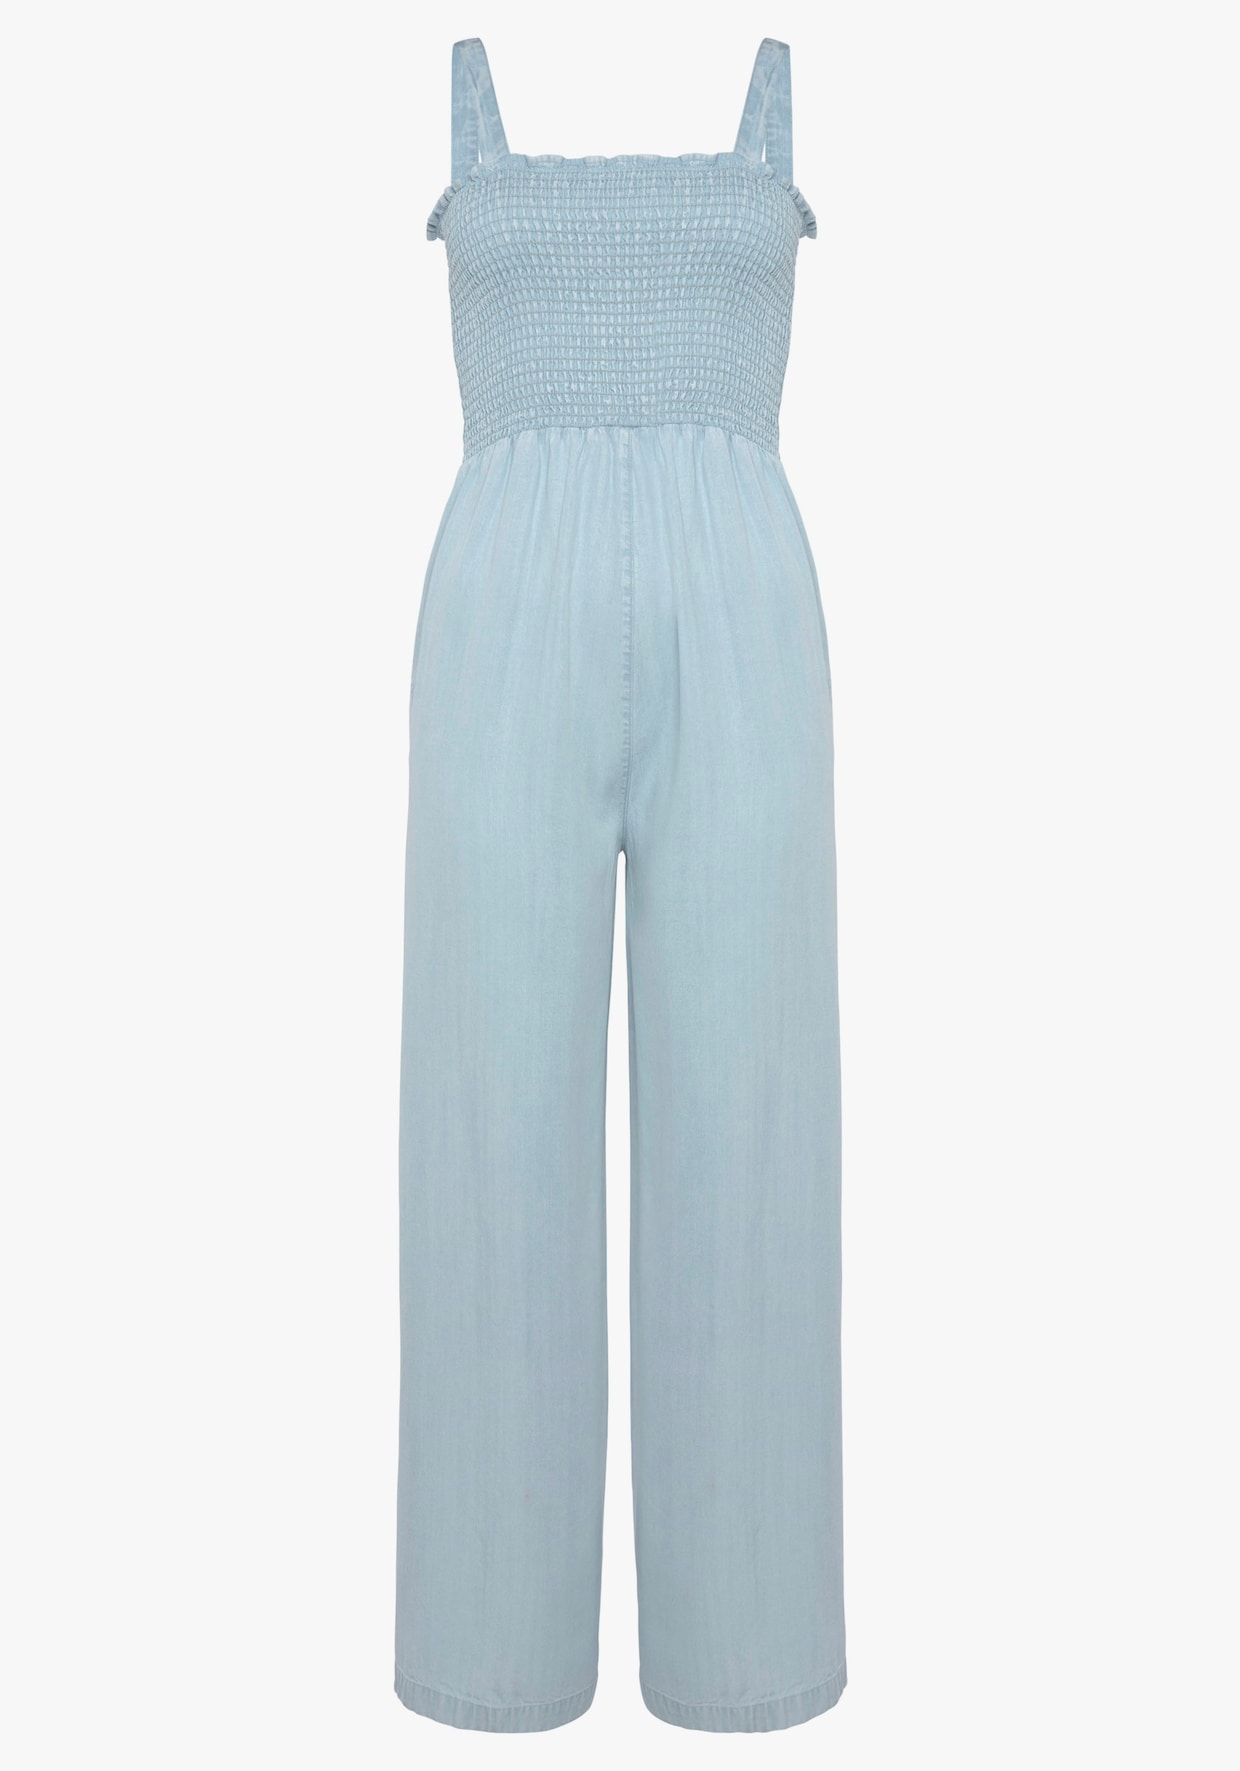 s.Oliver Overall - blue washed